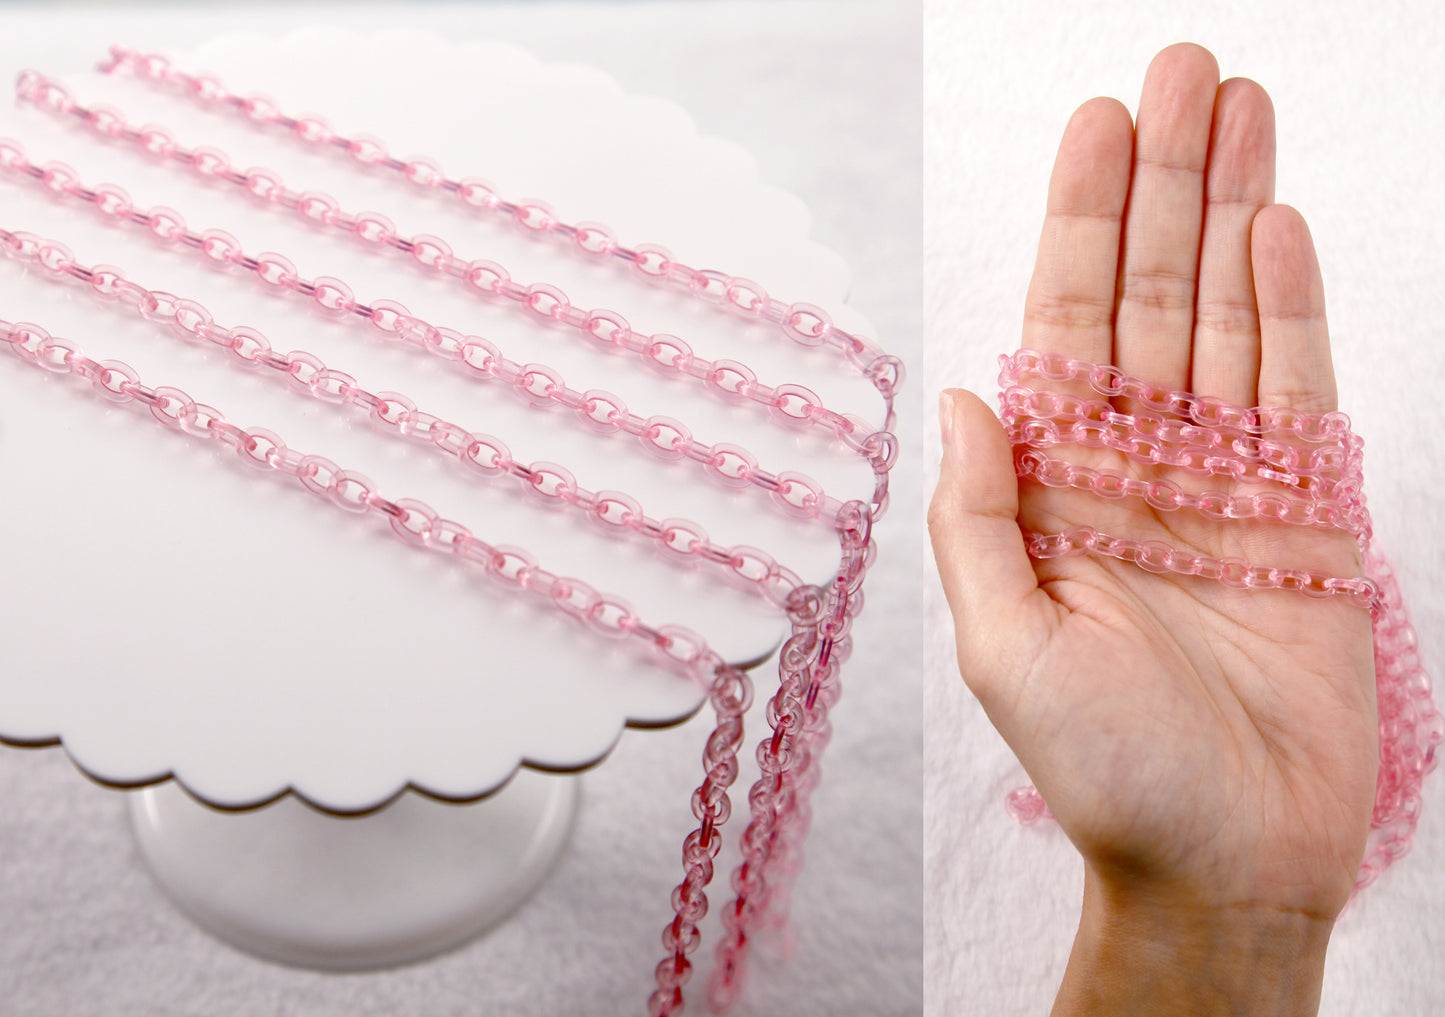 Transparent Pink Plastic Chain - 8mm Perfect Acrylic or Plastic Chain - 20 inch / 50 cm length - For Necklaces and Jewelry - 3 pcs set